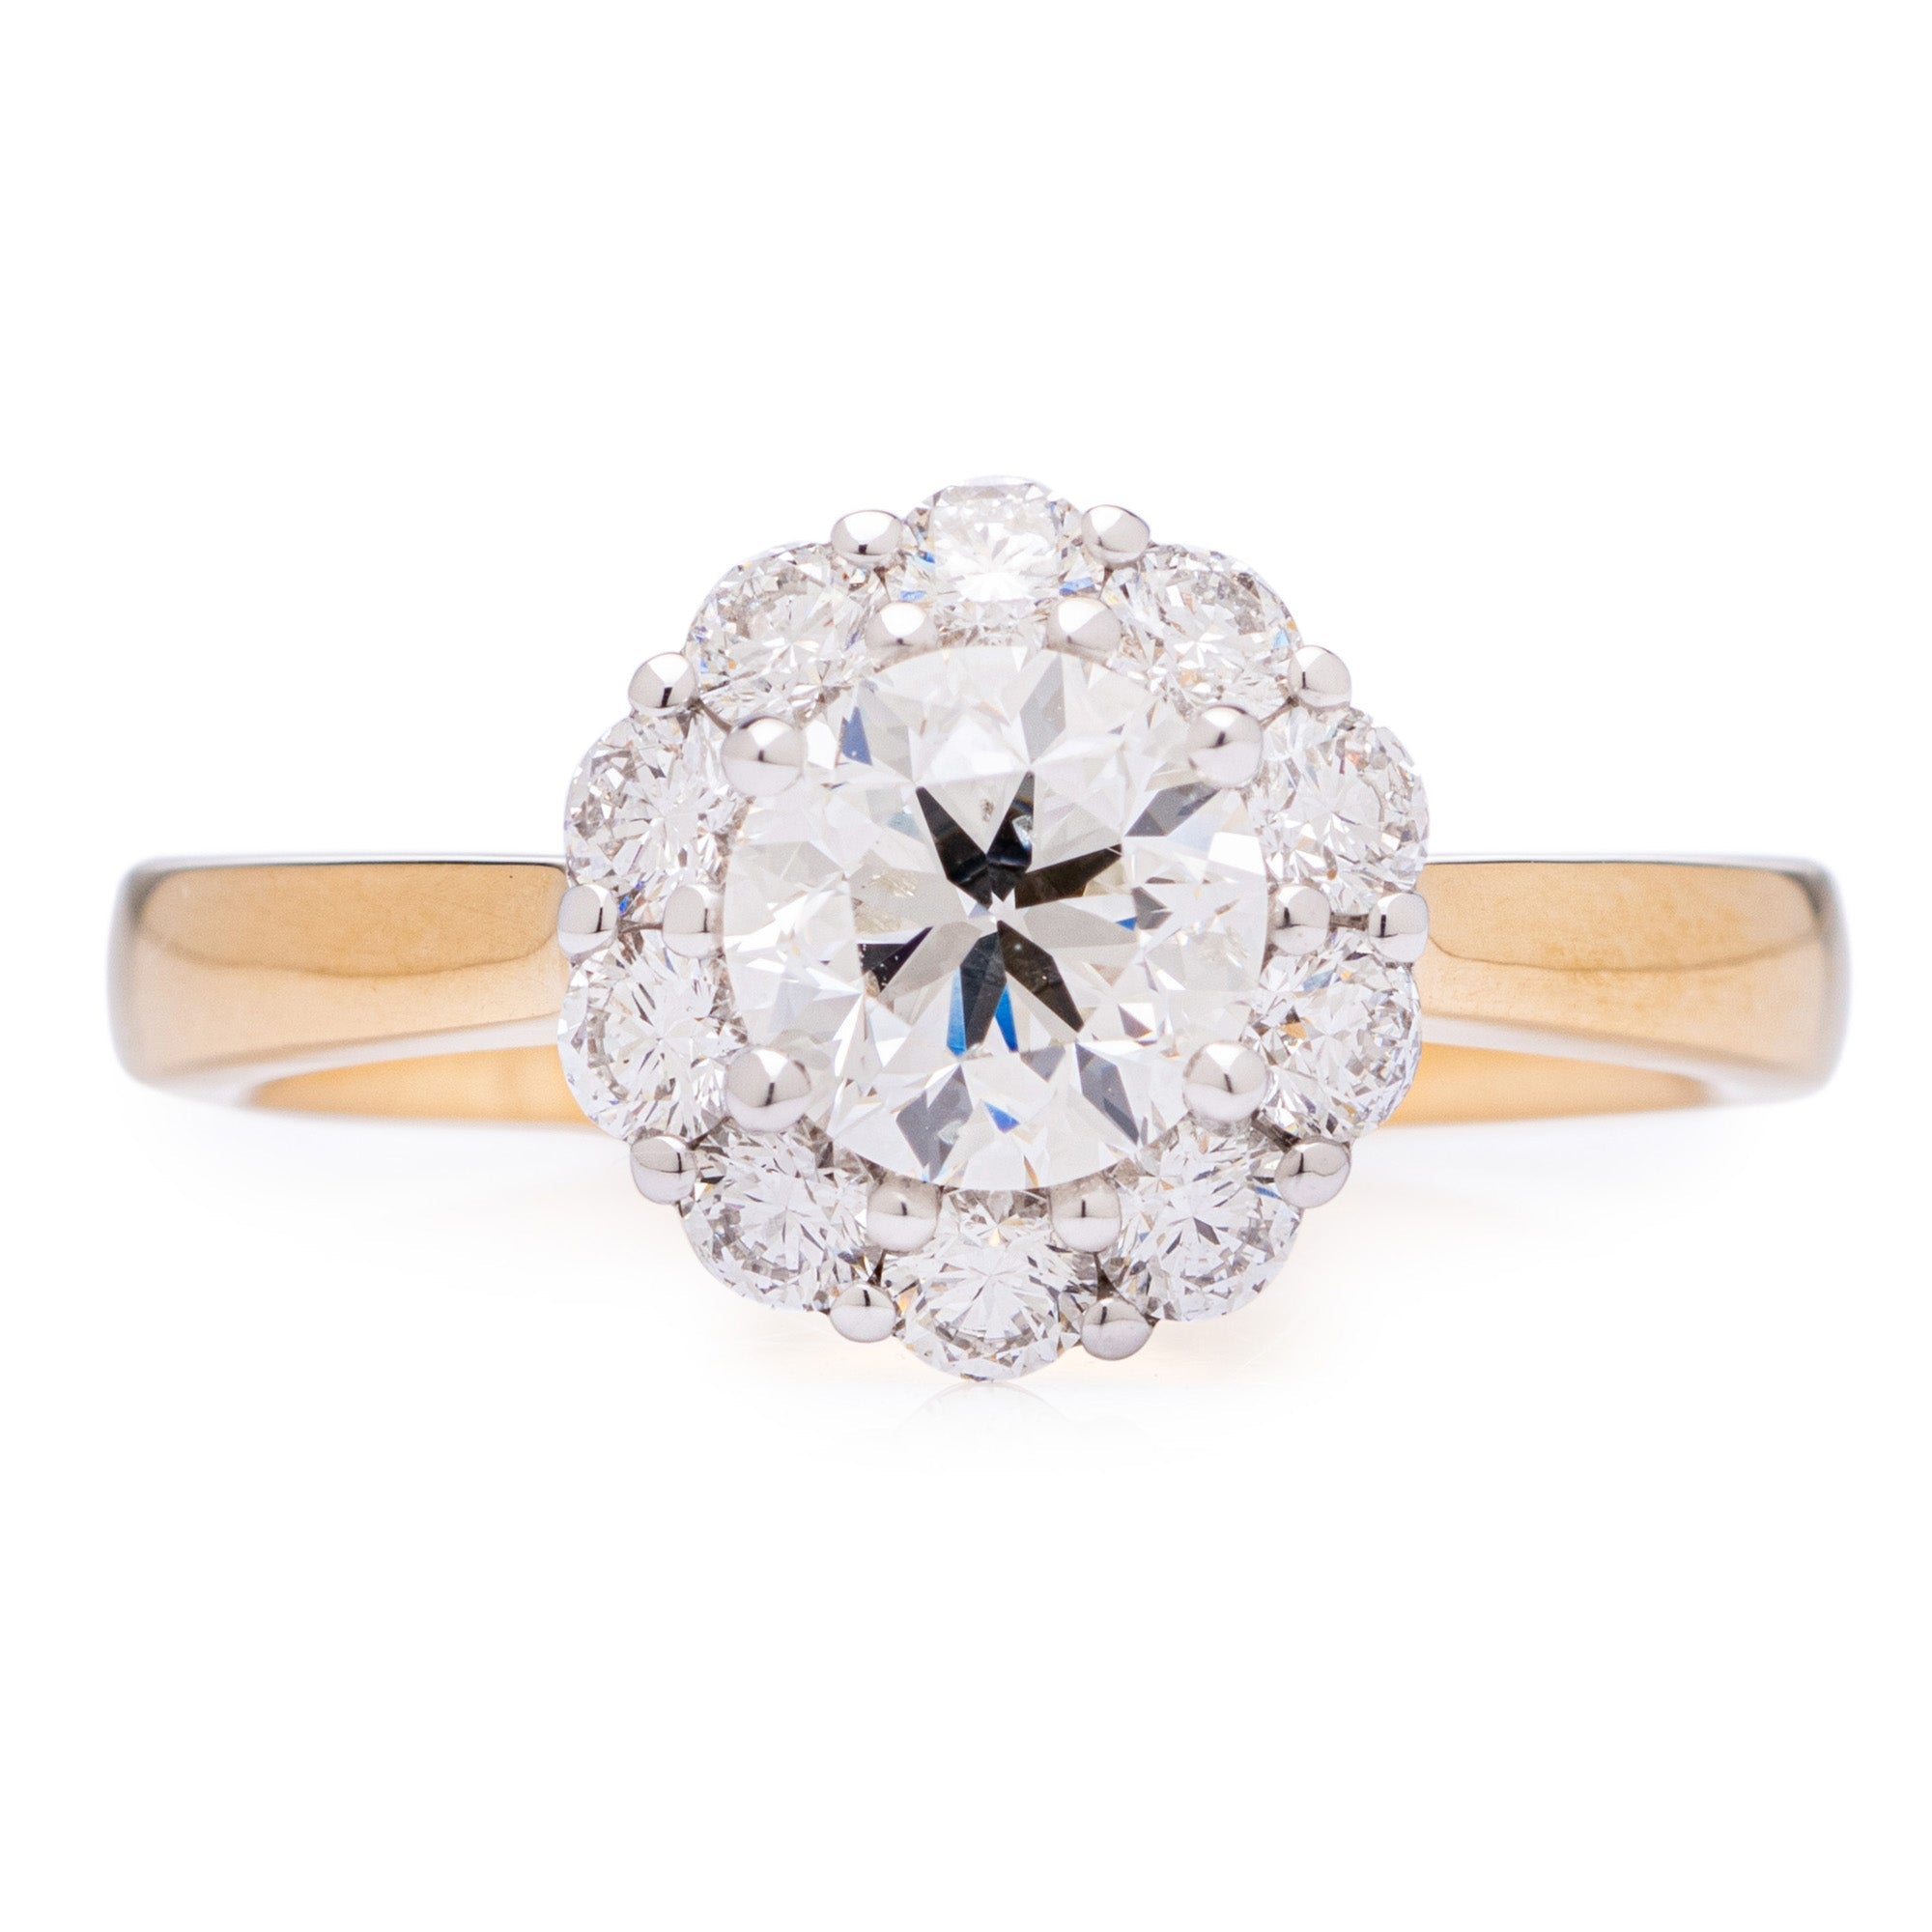 YELLOW GOLD ROUND BRILLIANT CUT DIAMOND CLUSTER ENGAGEMENT RING